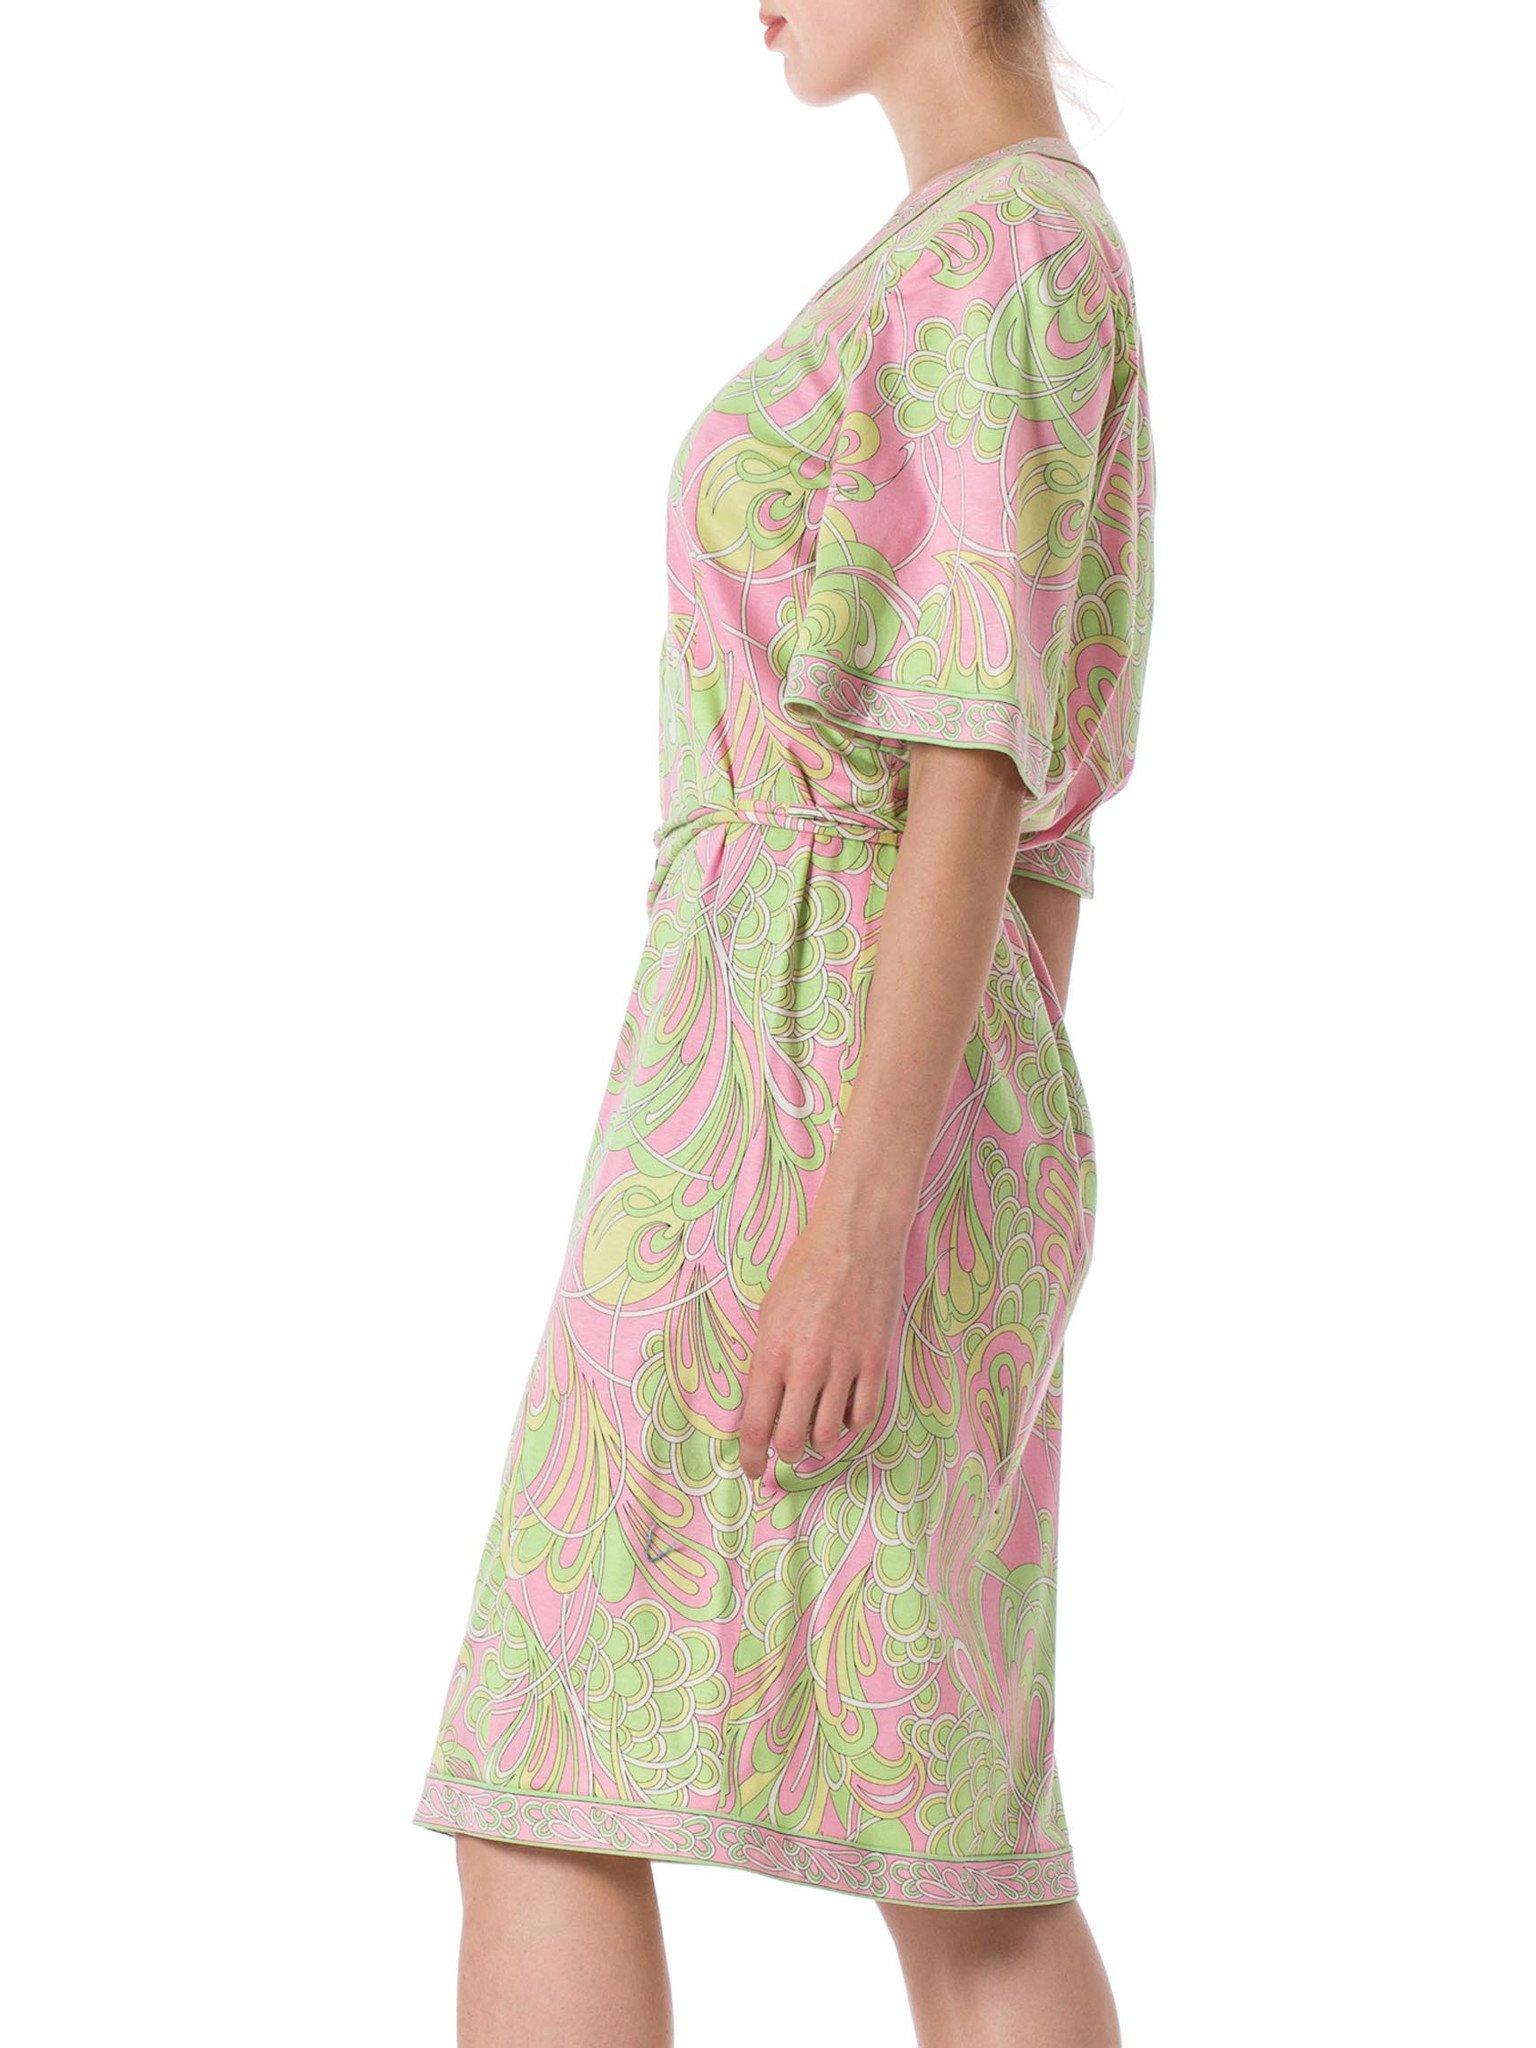 Women's 1960S AVERADO BESSI Baby Pink & Green Cotton Jersey Mod Abstract Psychedelic Pr For Sale